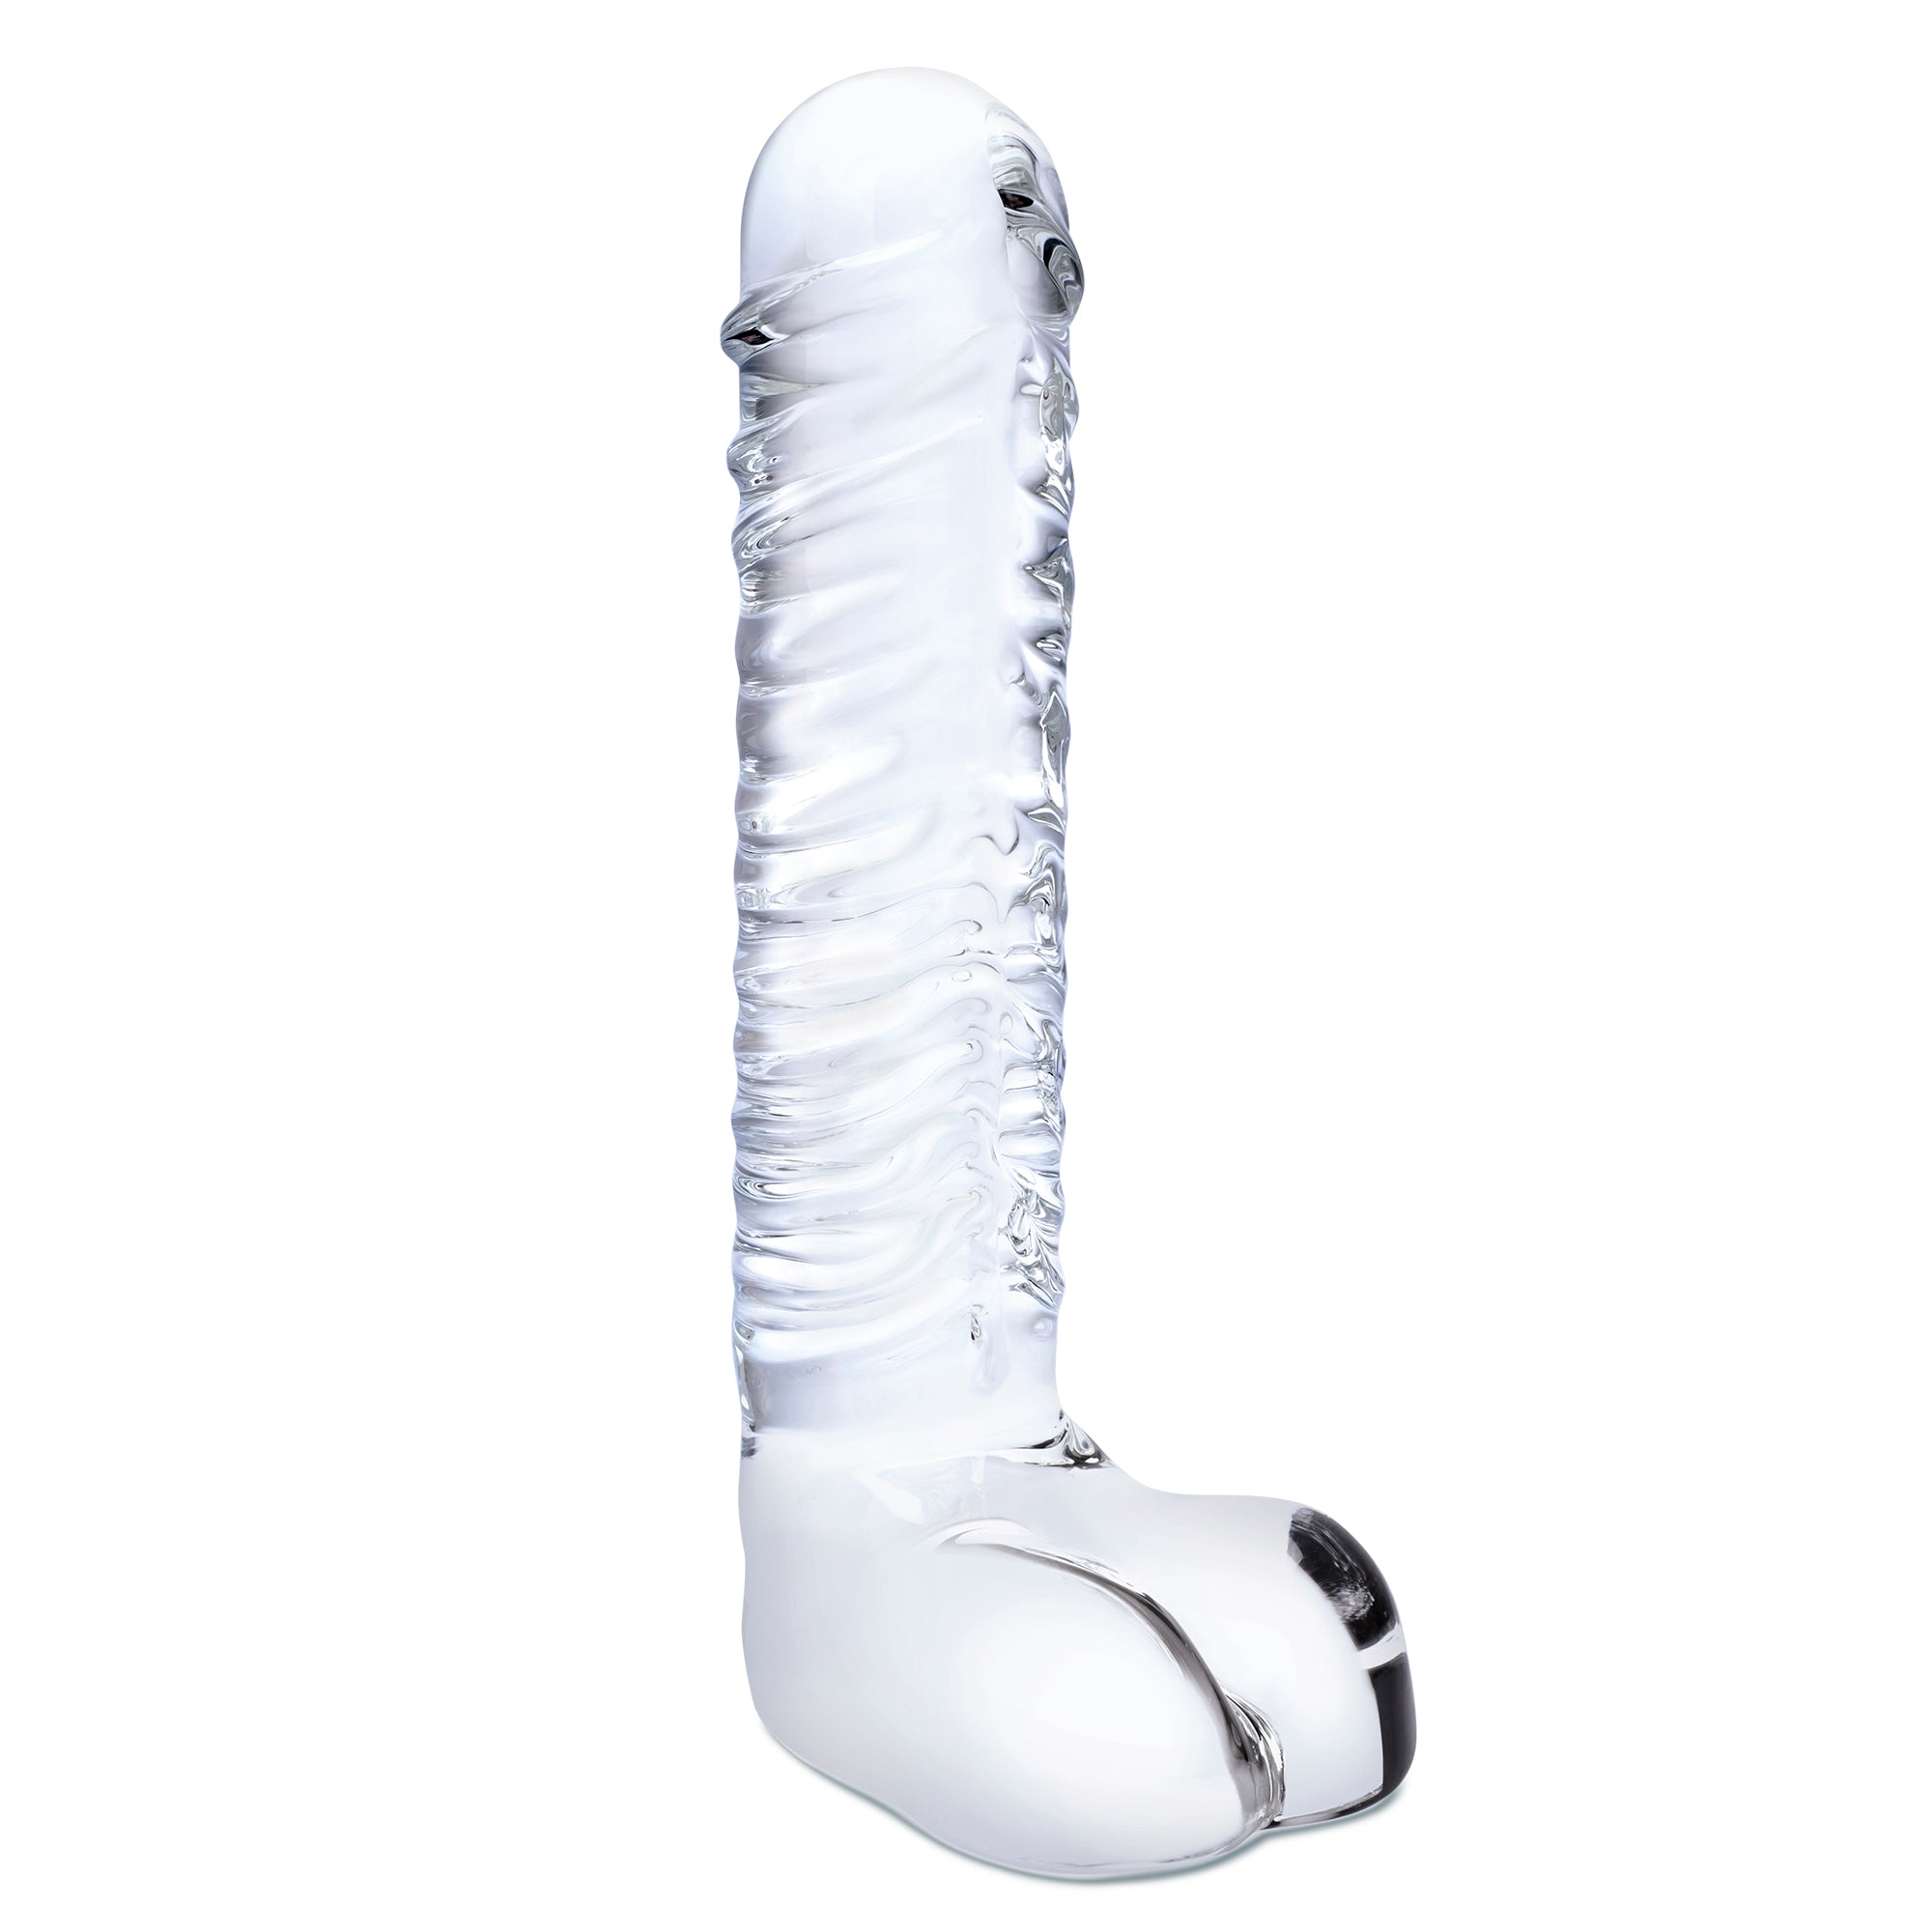 8" Realistic Ribbed Glass  G-Spot Dildo with Balls